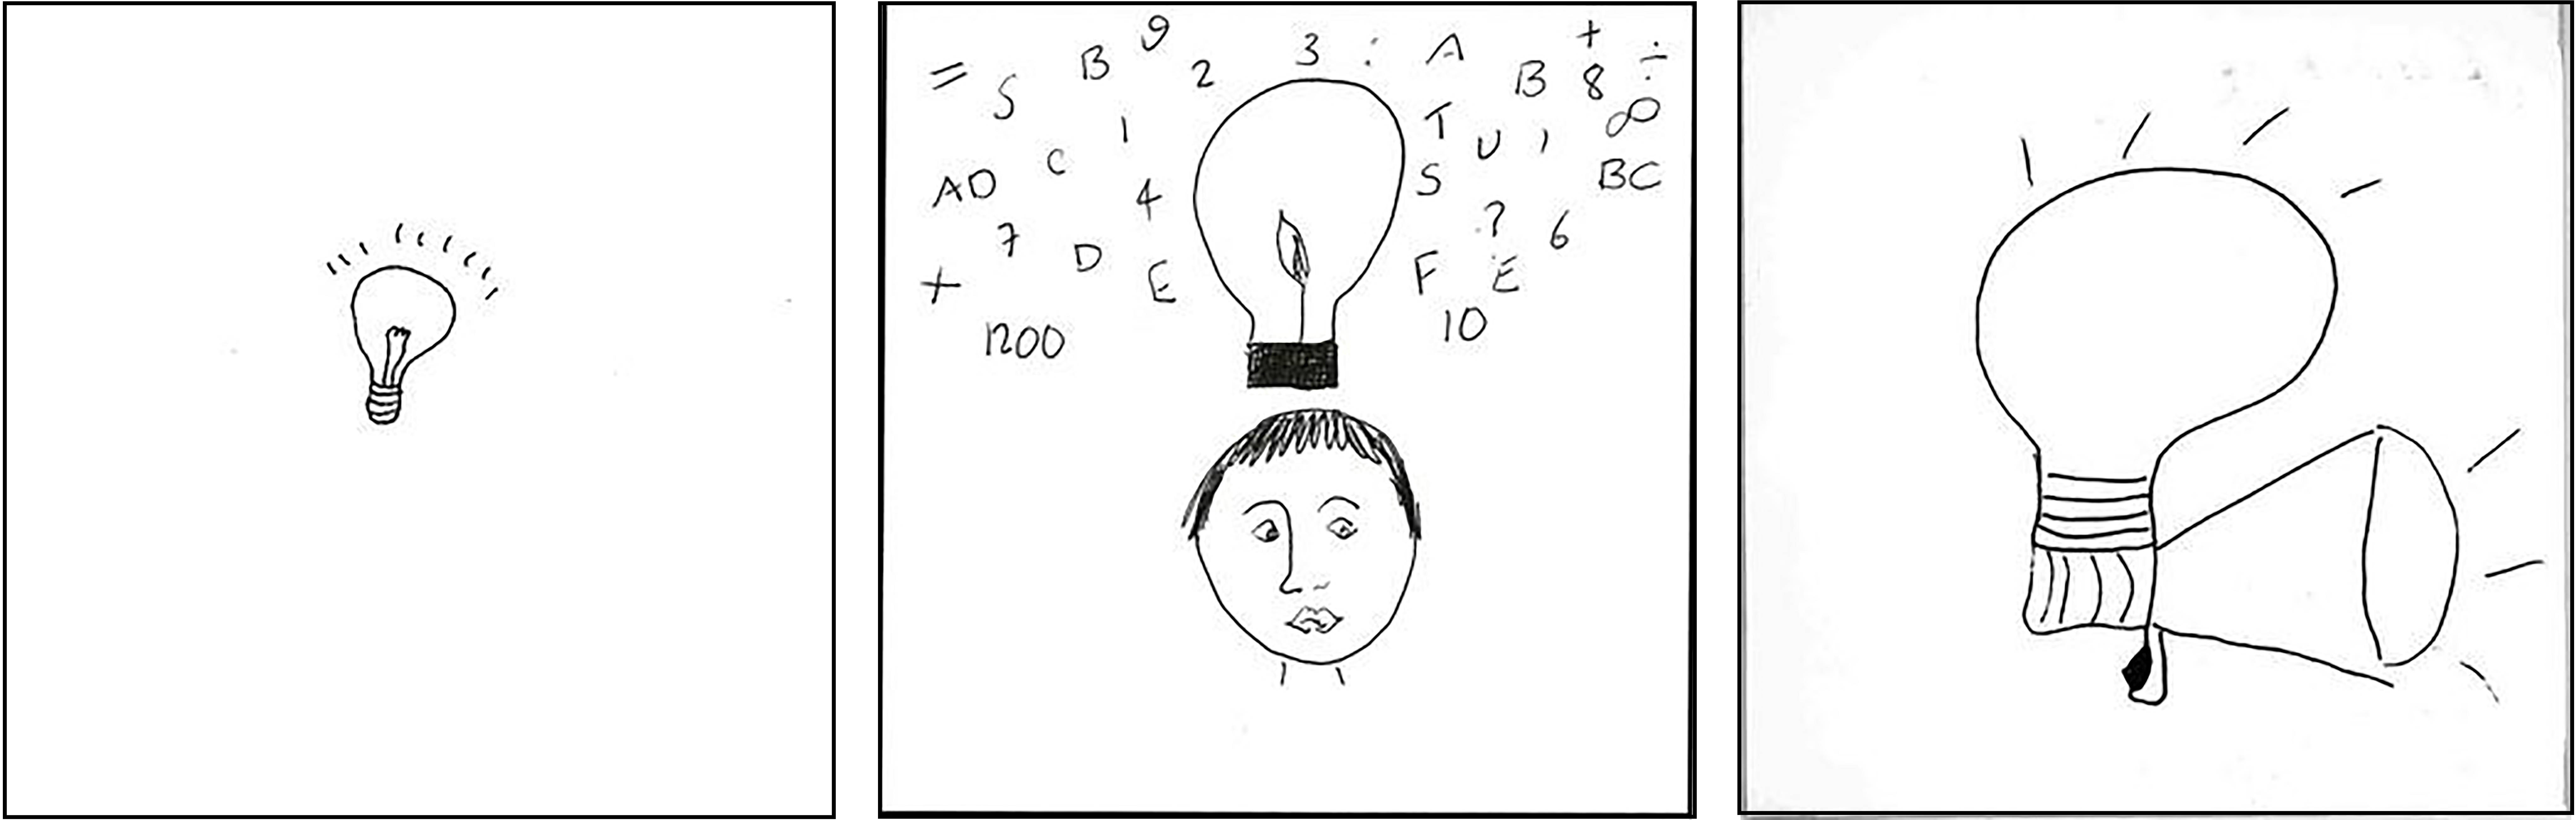 Many pictorial metaphors appeared in the iSquare study of information. One of the most common source domains was the light bulb. Other popular source domains were: earth, web, tree, light bulb, box, cloud, and fishing/mining [25]. Examples of the pictorial metaphor of light bulb are shown above.